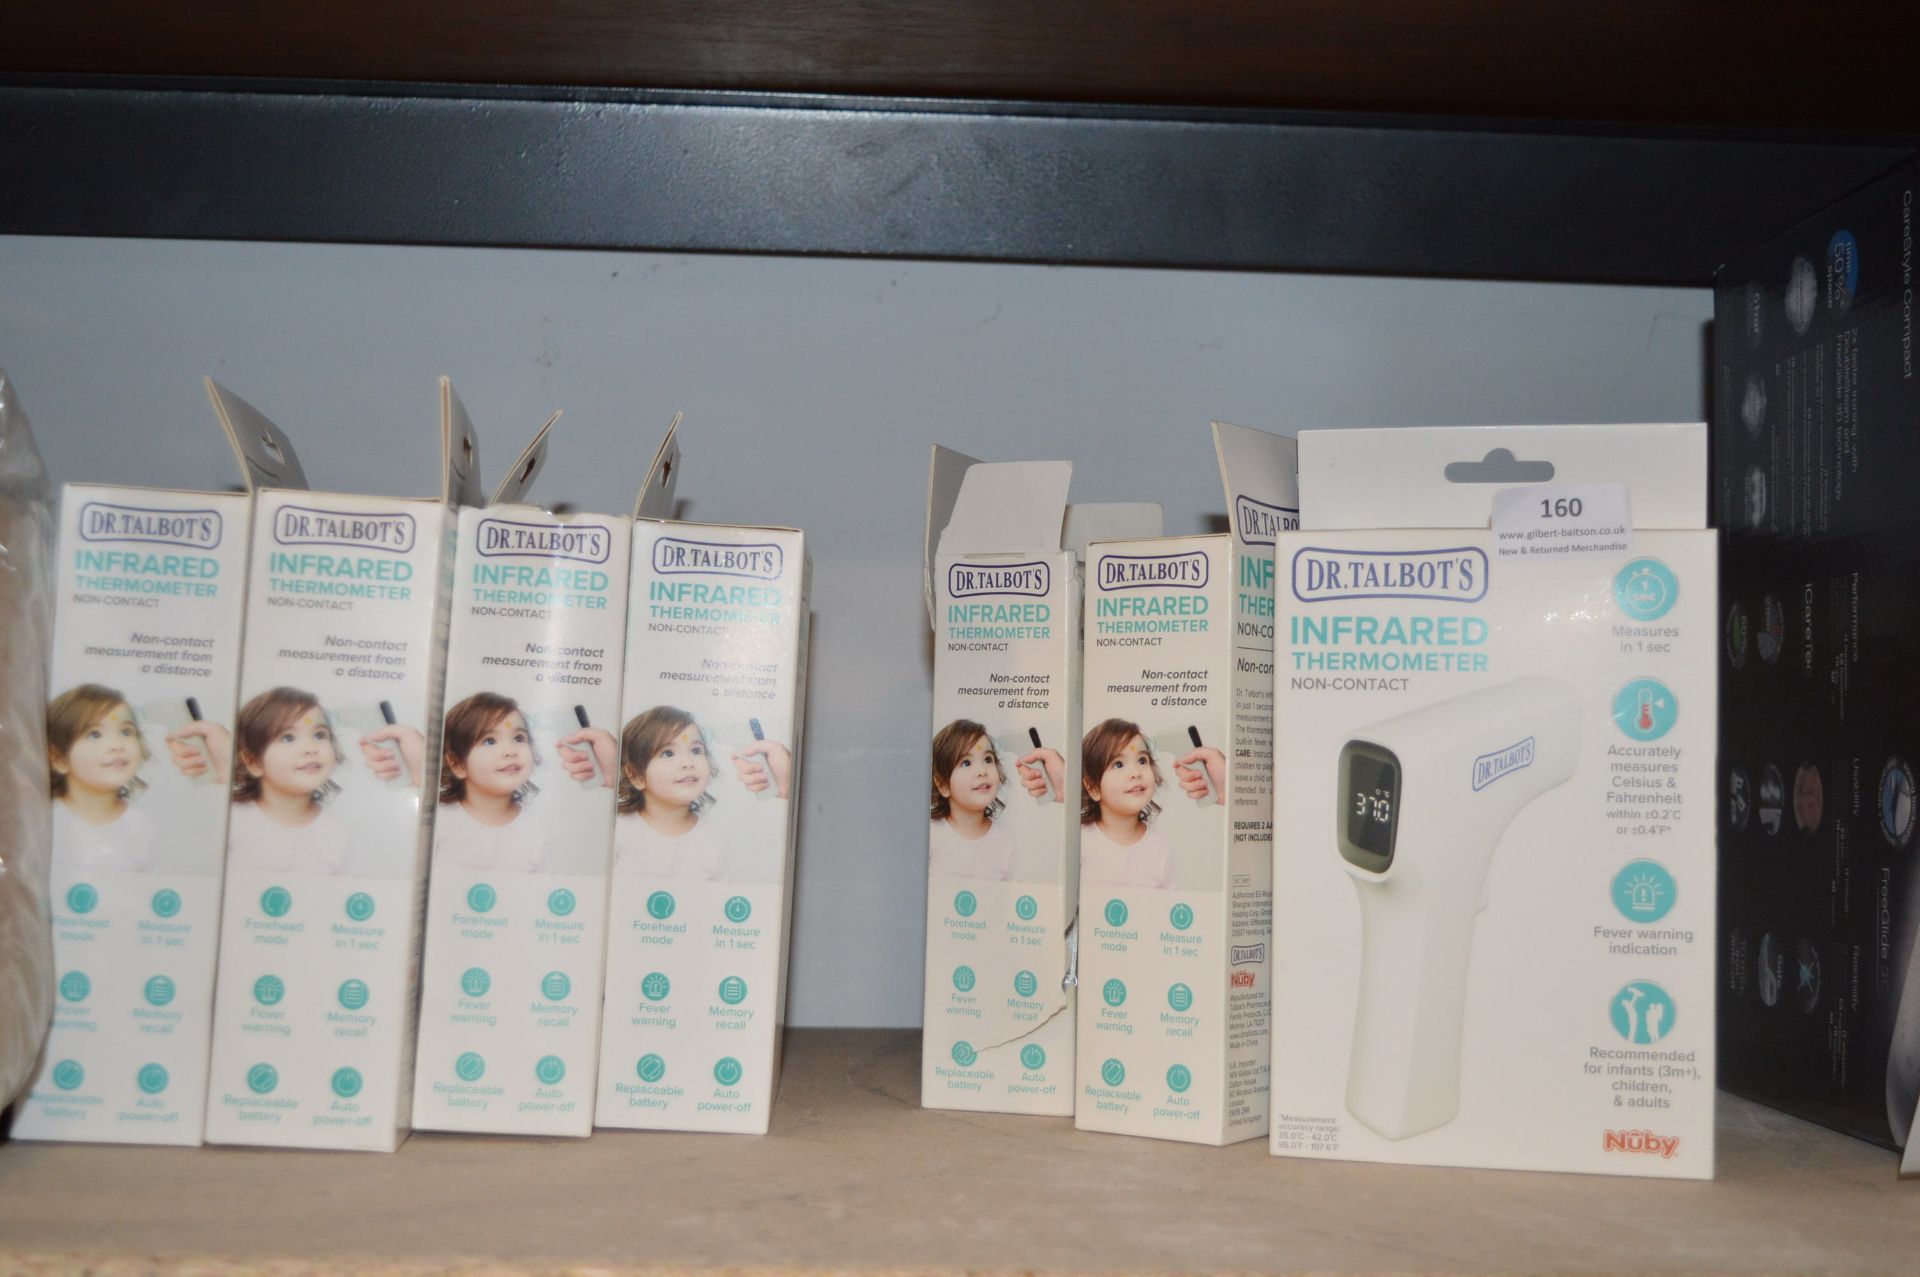 *Seven Dr. Talbots Infrared Thermometers